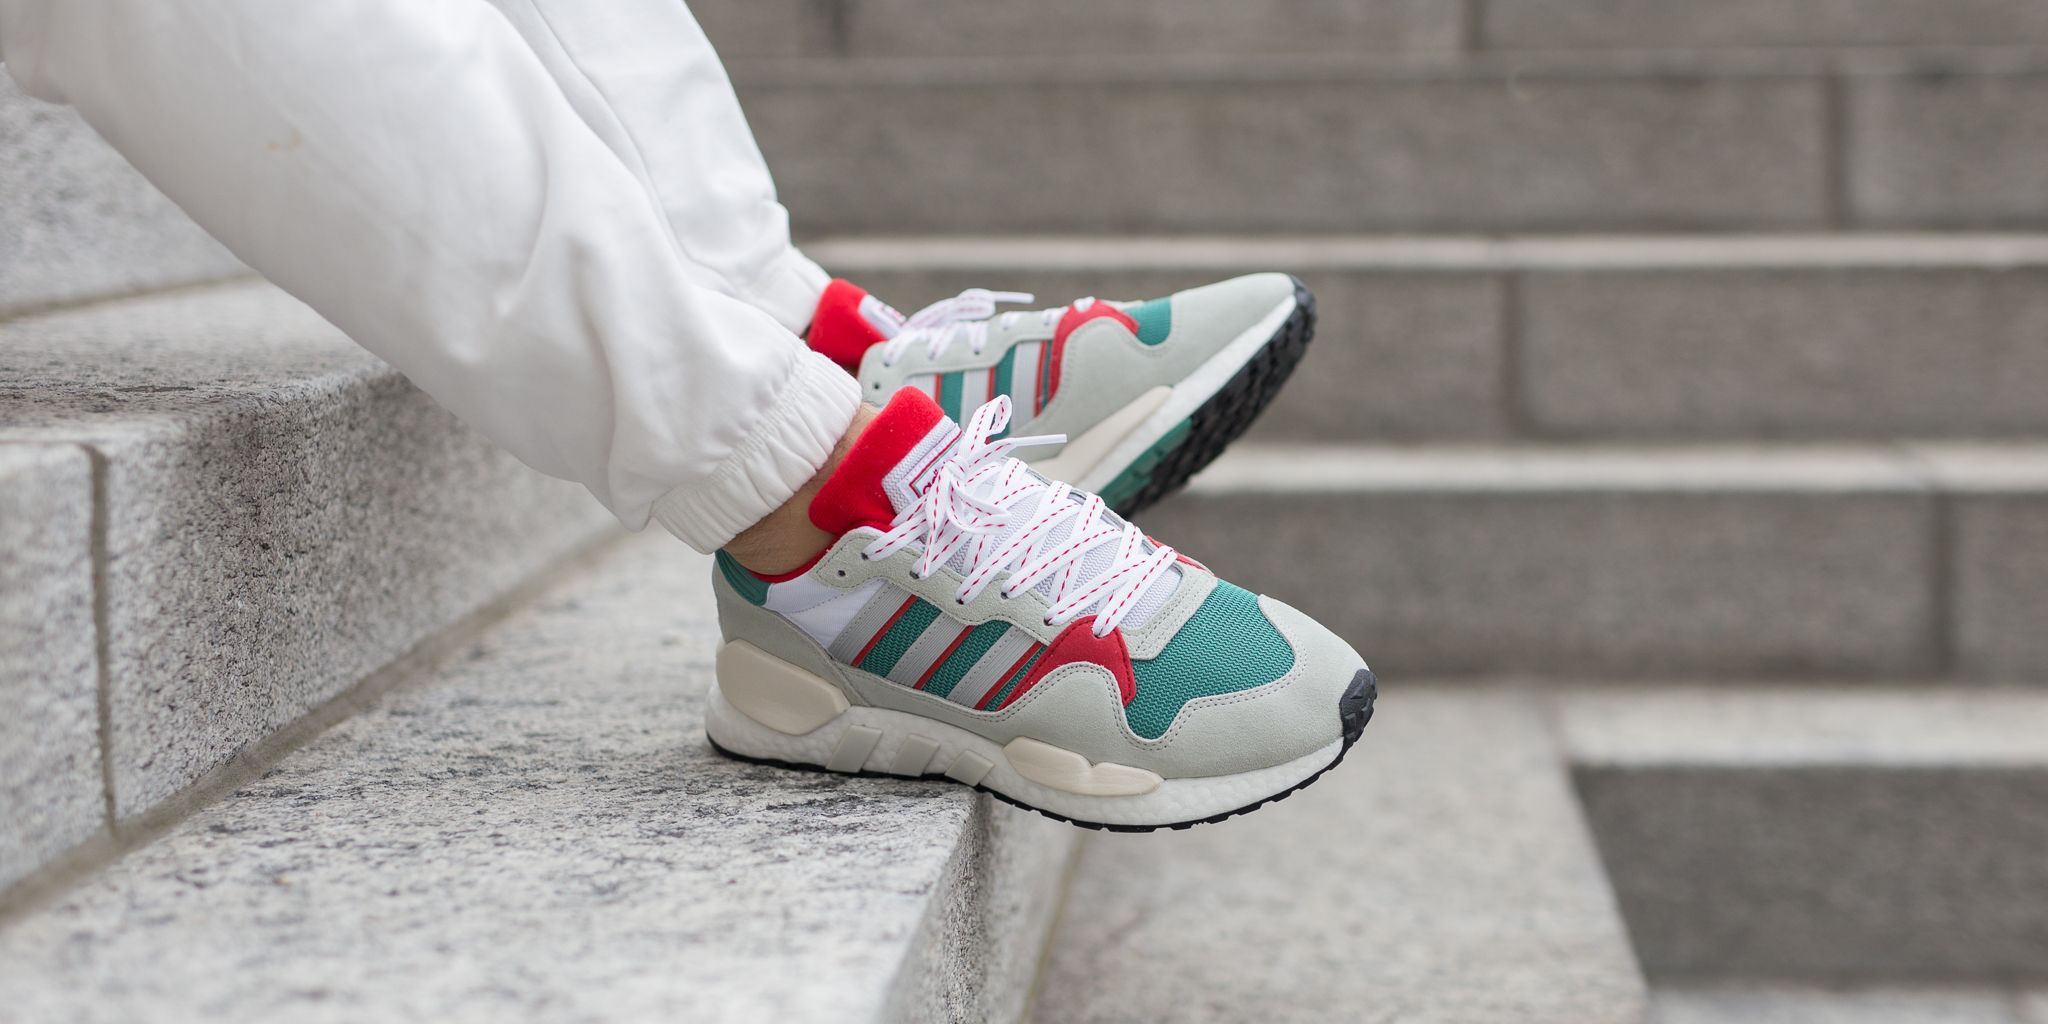 Costa Imbécil calcio Titolo on Twitter: "Adidas ZX 930 x EQT 🔹Never Made Pack 🔹 dropping  tonight Wednesday, 17th October 🔹0.00AM CET this way please ➡️  https://t.co/jn7JN7tBLA #adidas #adidasoriginals #nevermade #zx930 #eqt # micropacer #r1 #boston #